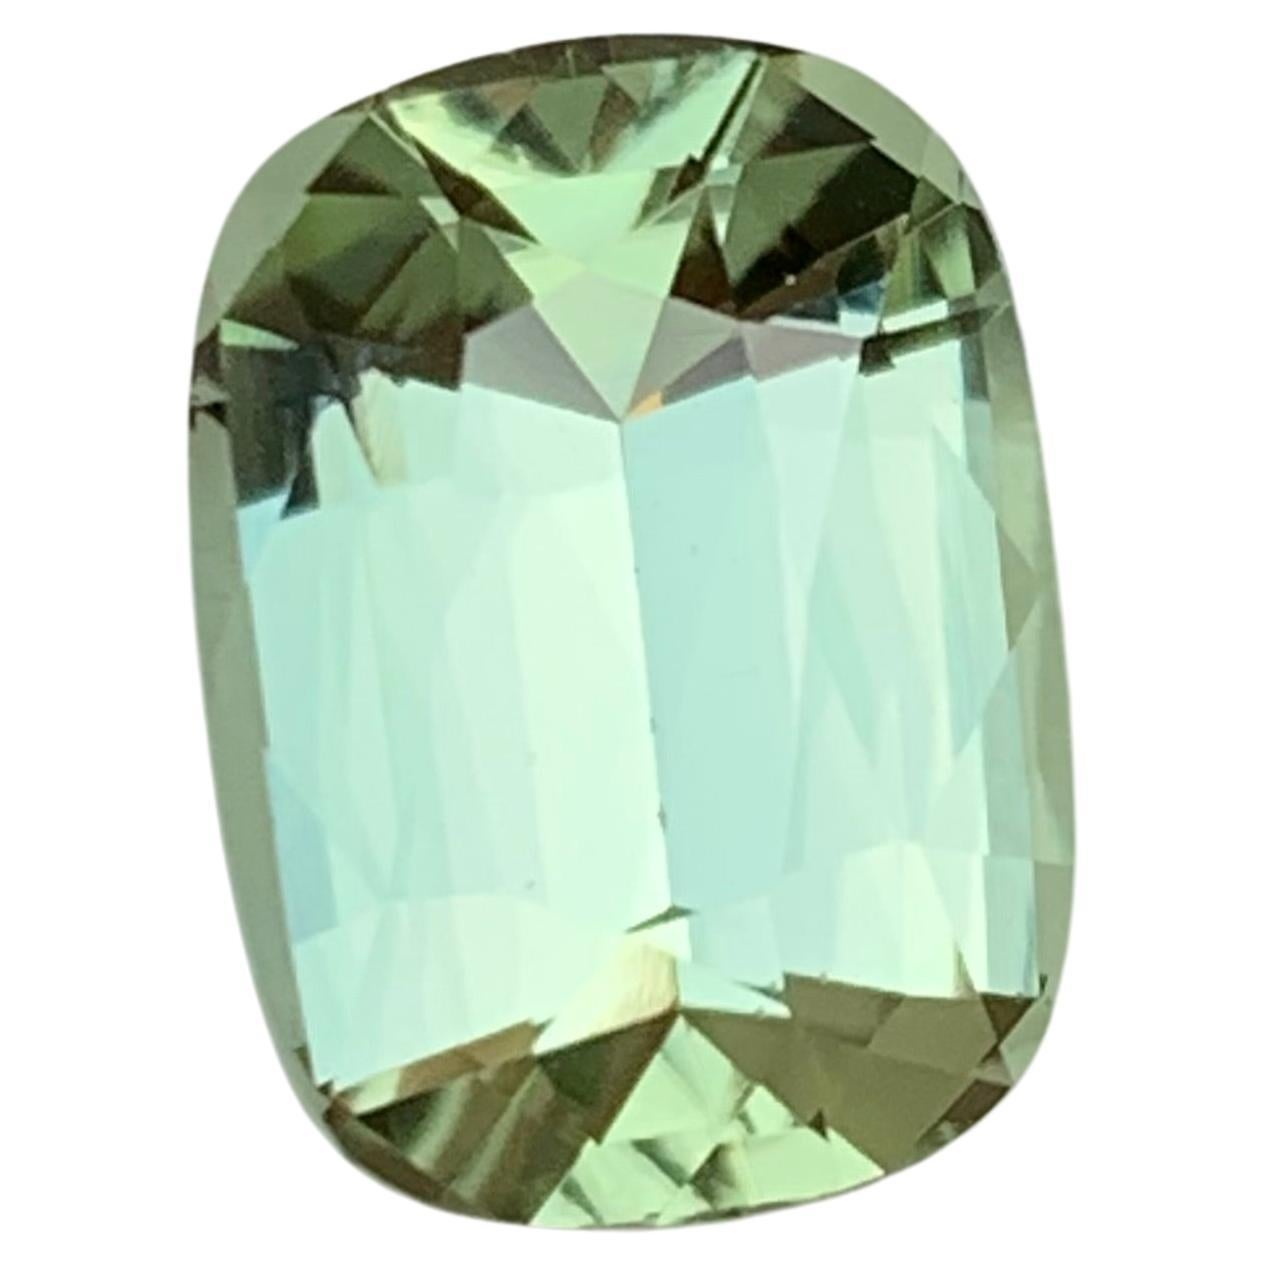 Pale Green Natural Tourmaline Gemstone 5.35 Ct Step Cushion Cut for Ring/Pendant For Sale